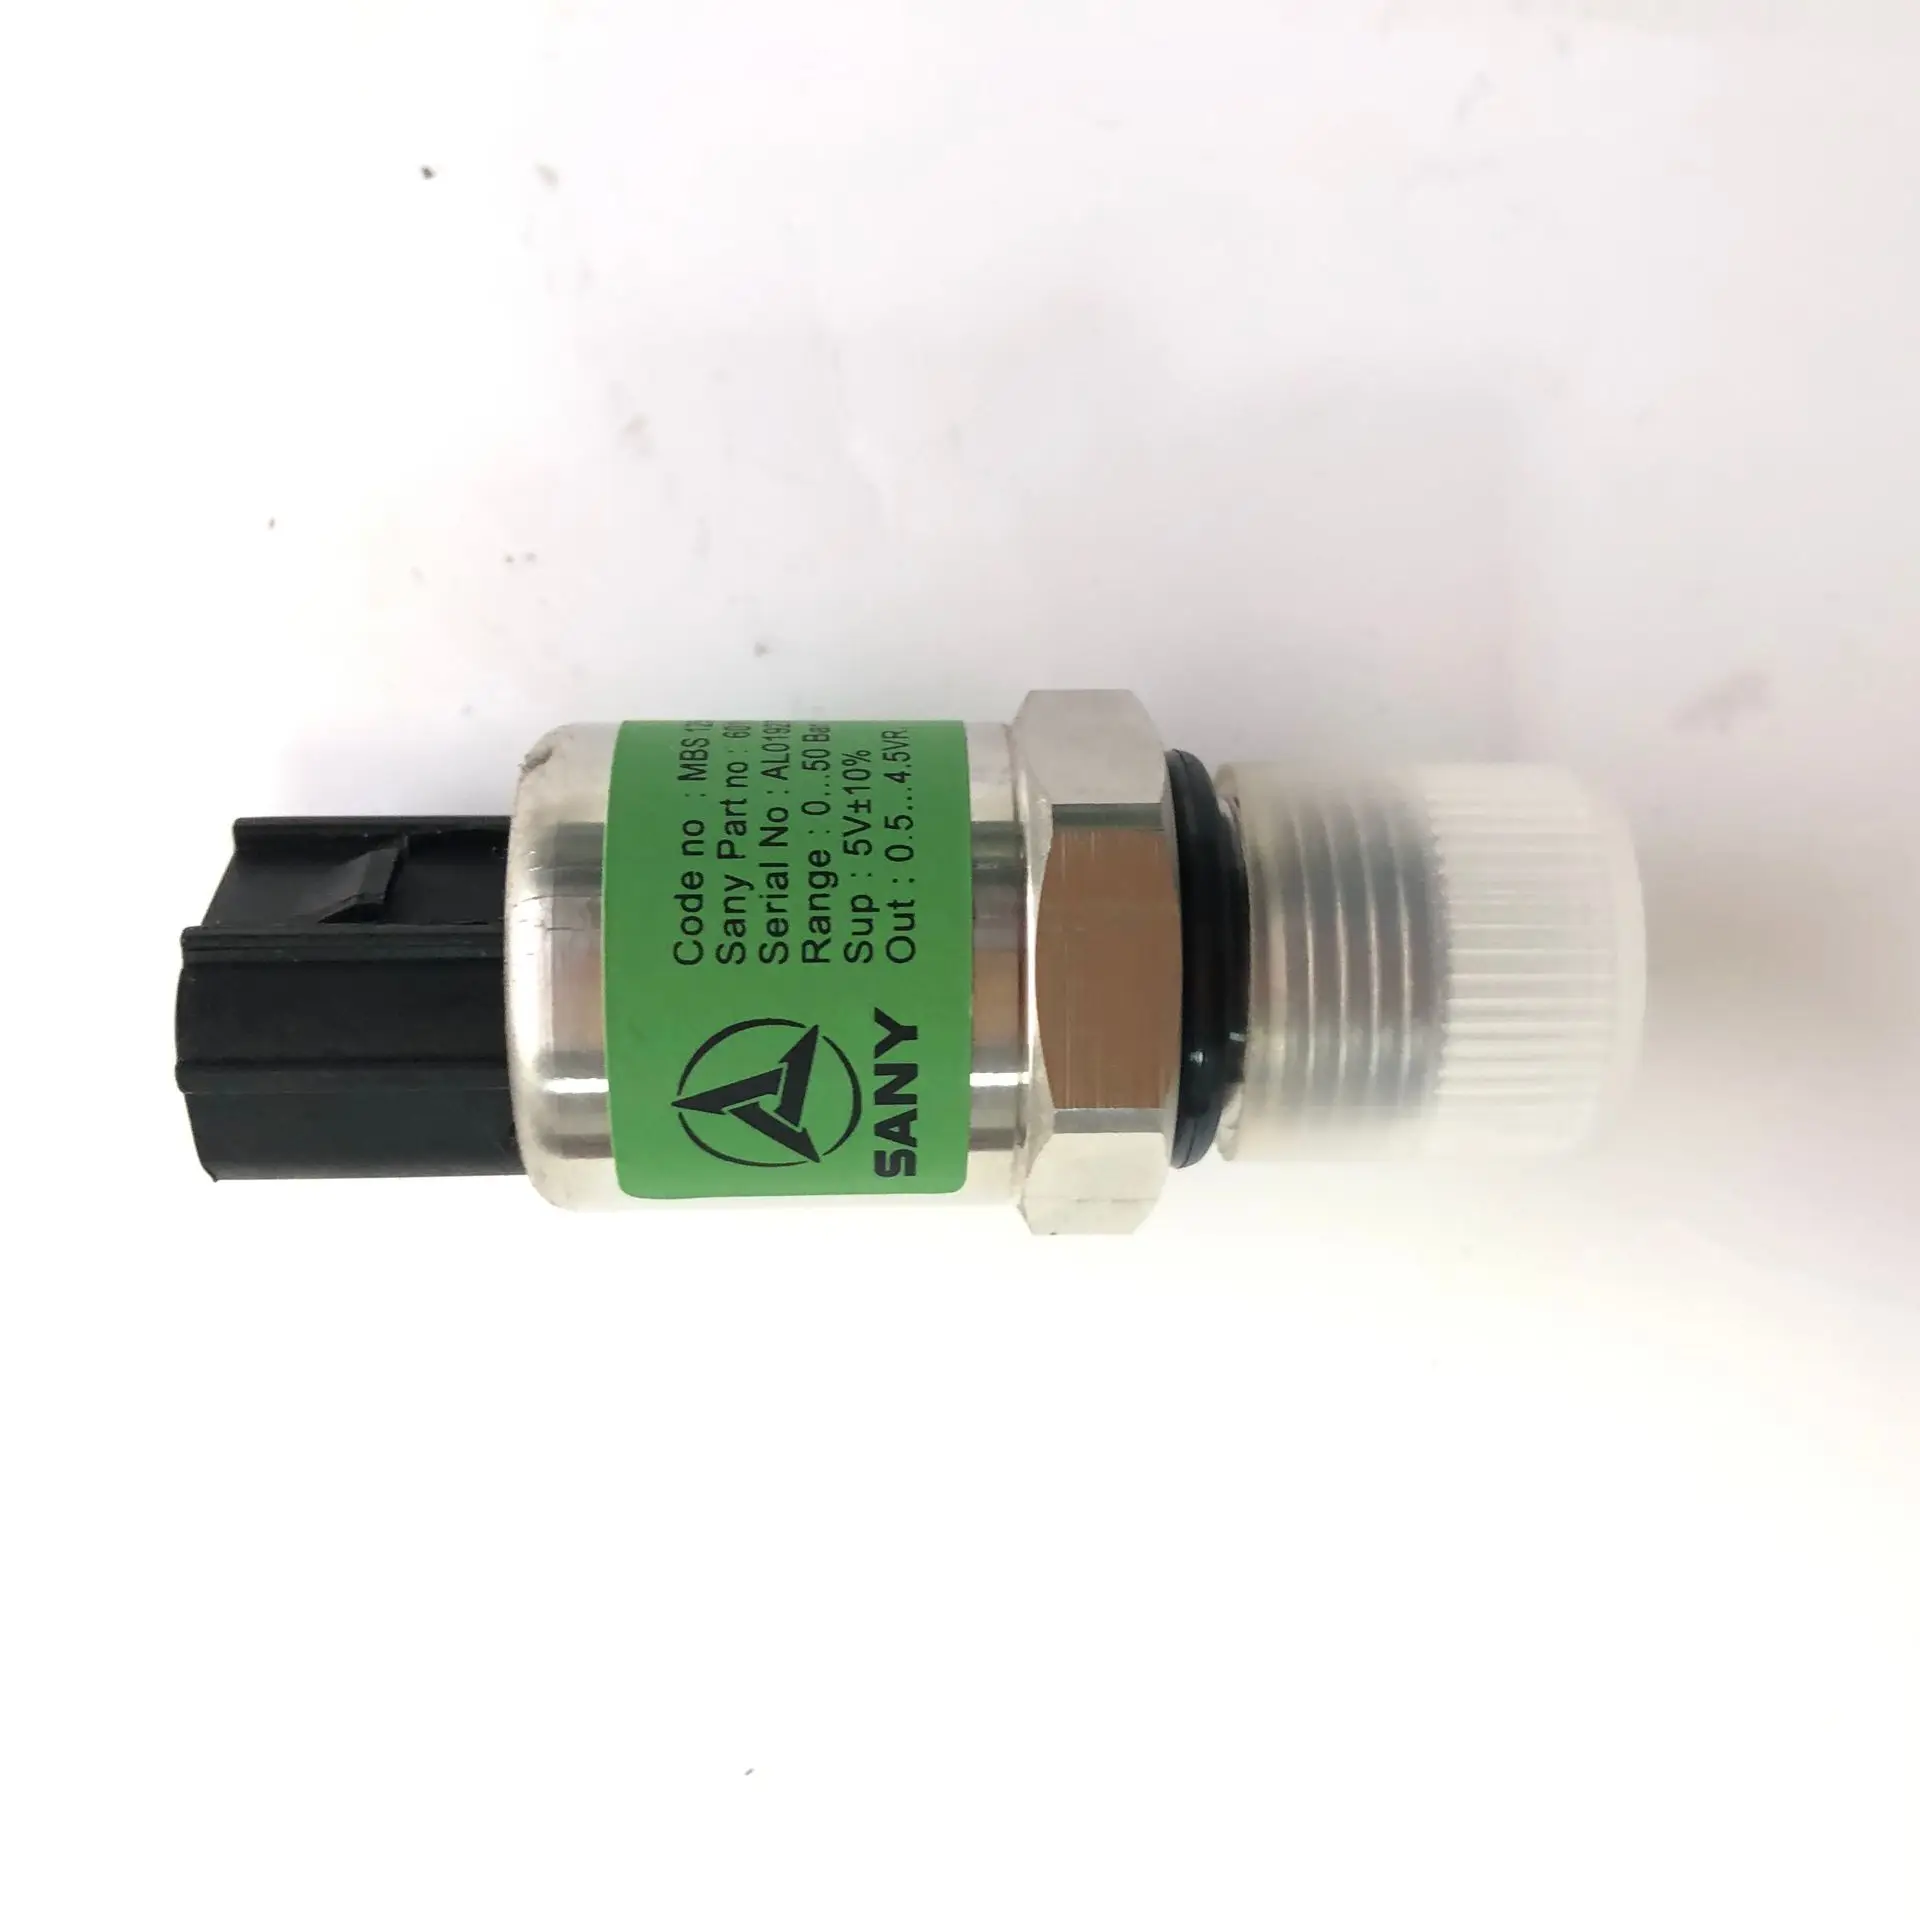 

60114798 Low Pressure Sensor (Round Plug, Short, 50Bar) for Sany SY75 SY135 SY205 SY215 SY235-8 SY235-9 Excavator Accessories